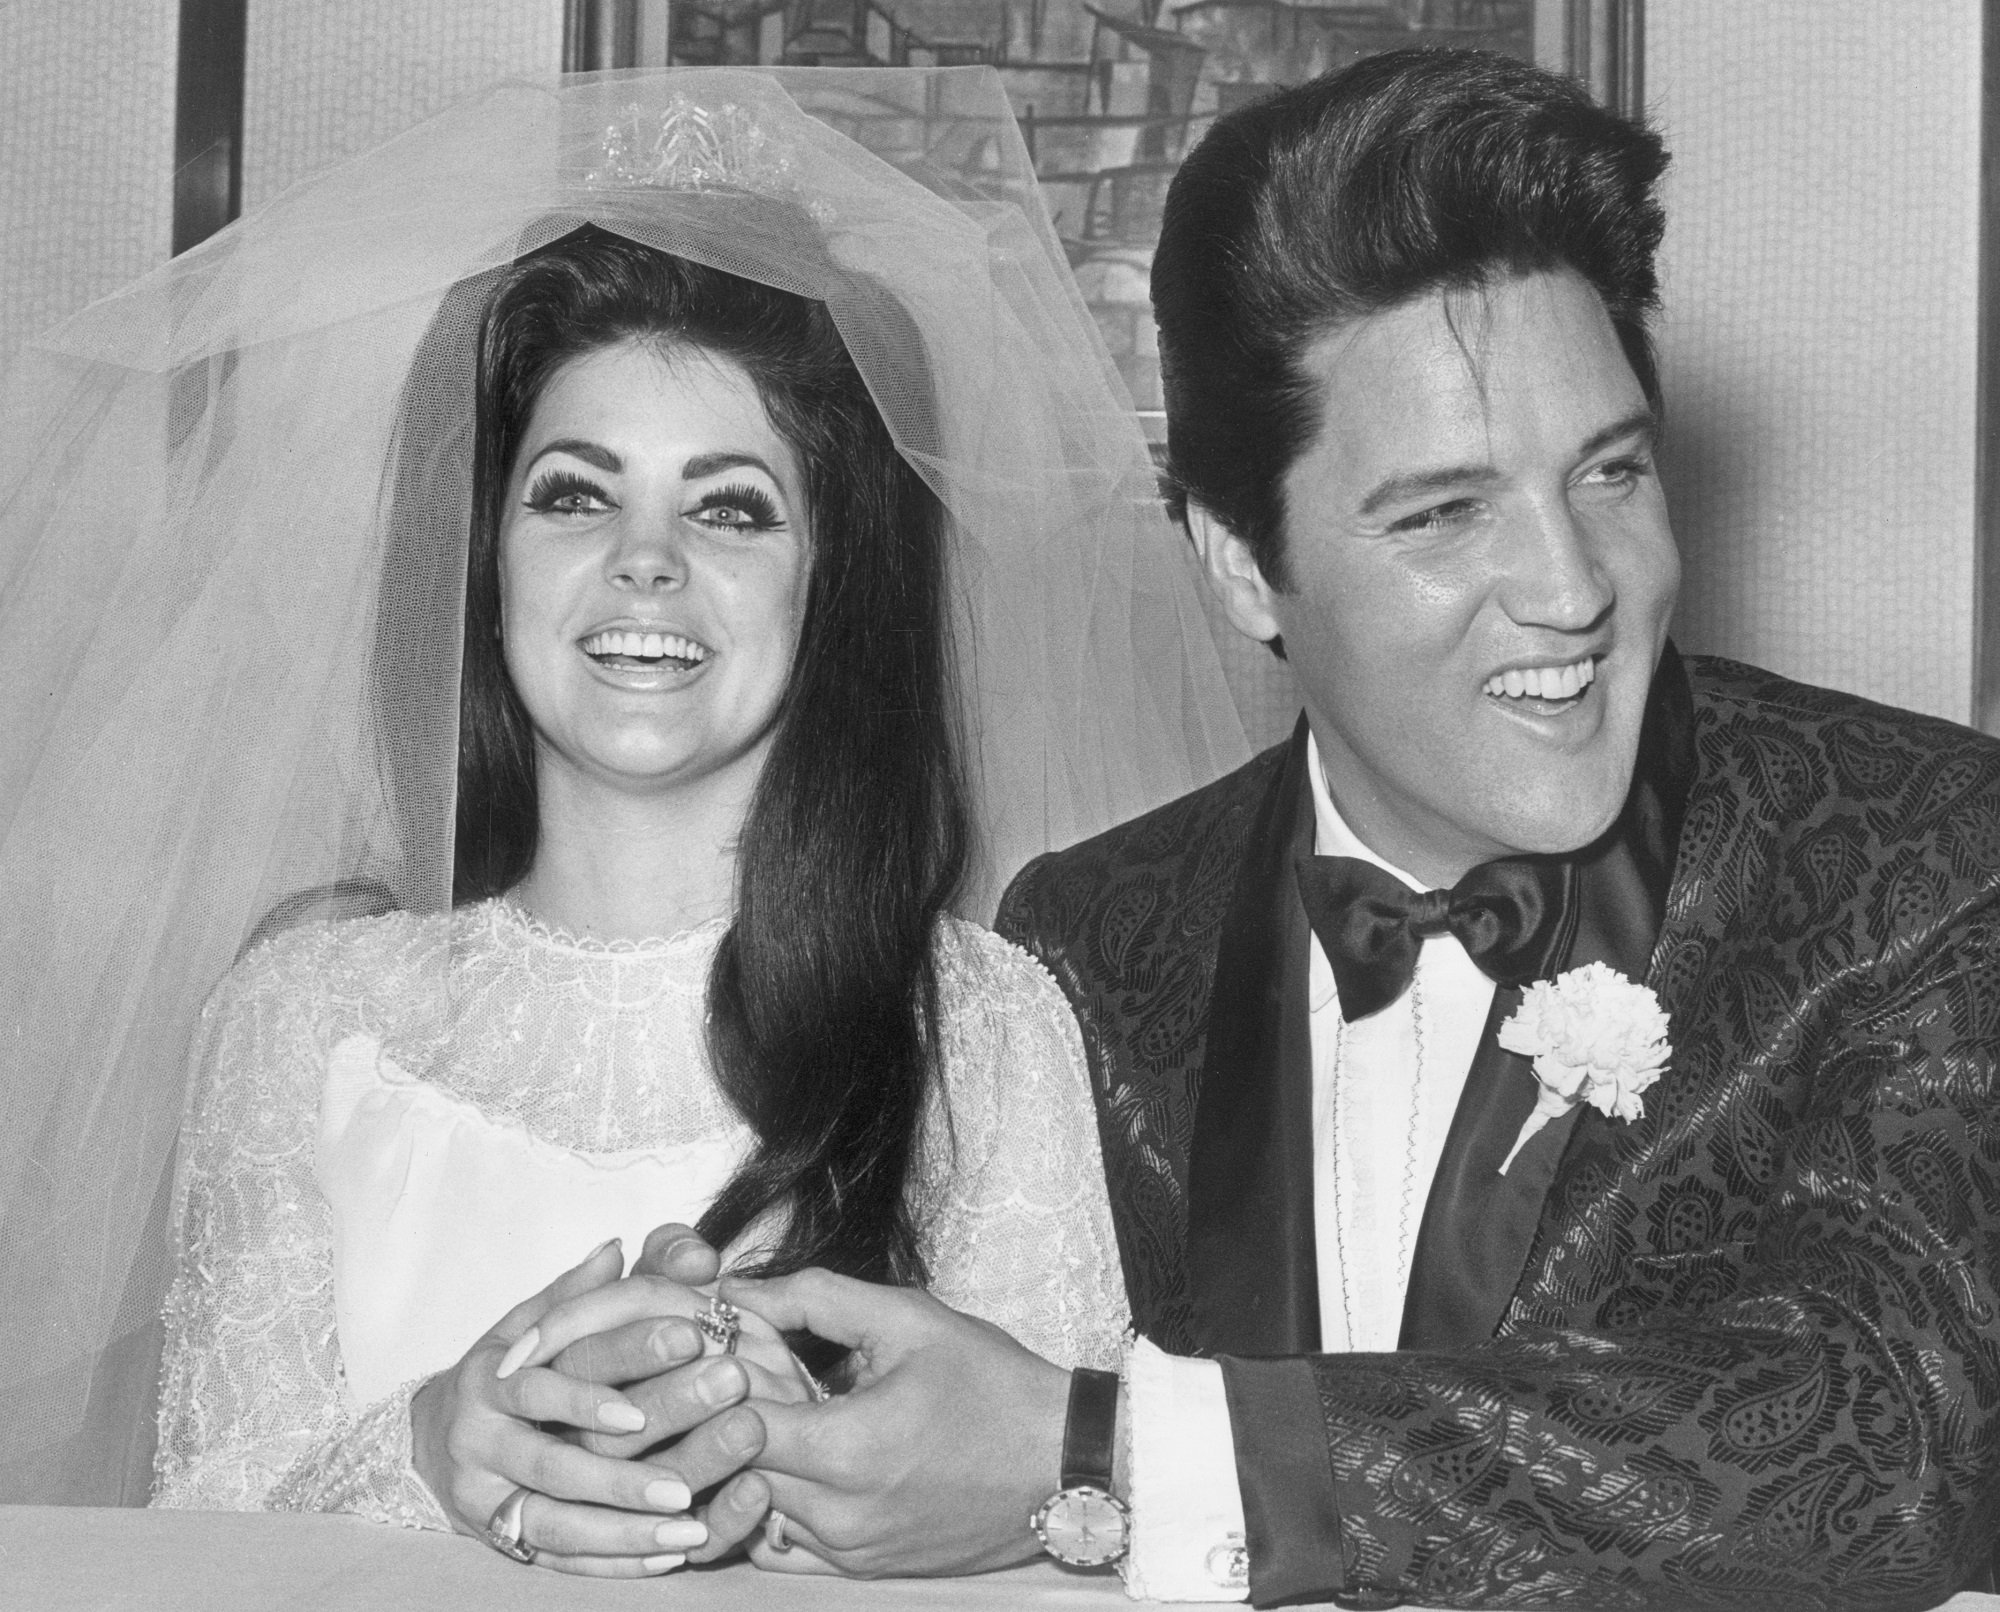 A black-and-white photo of Elvis Presley holding hands with Priscilla Beaulieu Presley on their wedding day